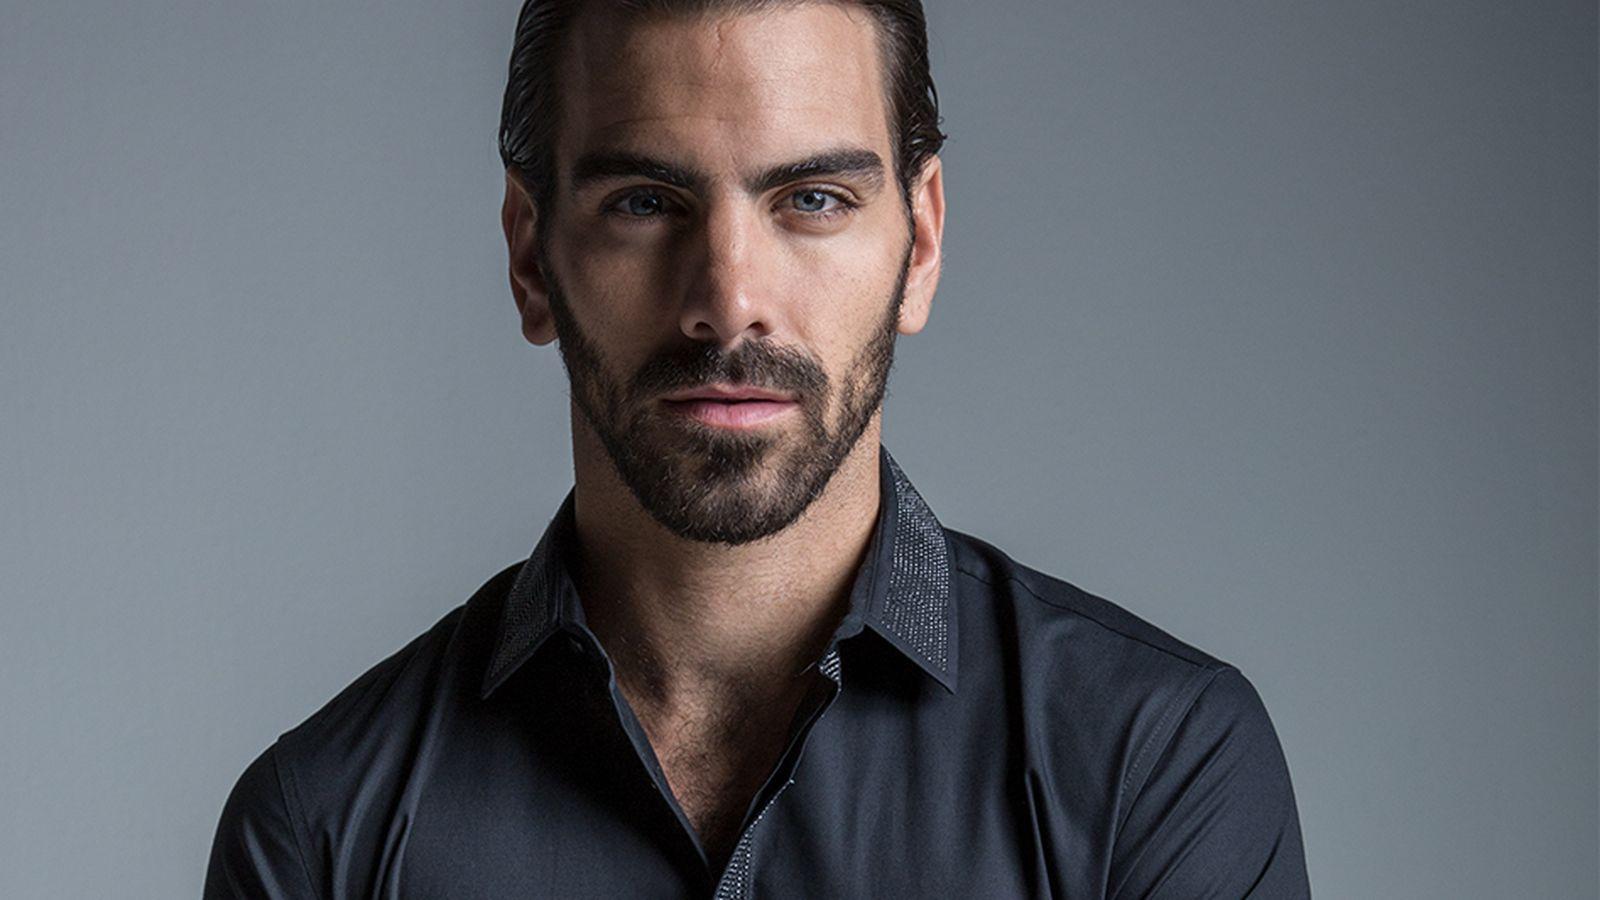 Model Nyle DiMarco on what fashion needs to do better to push diversity